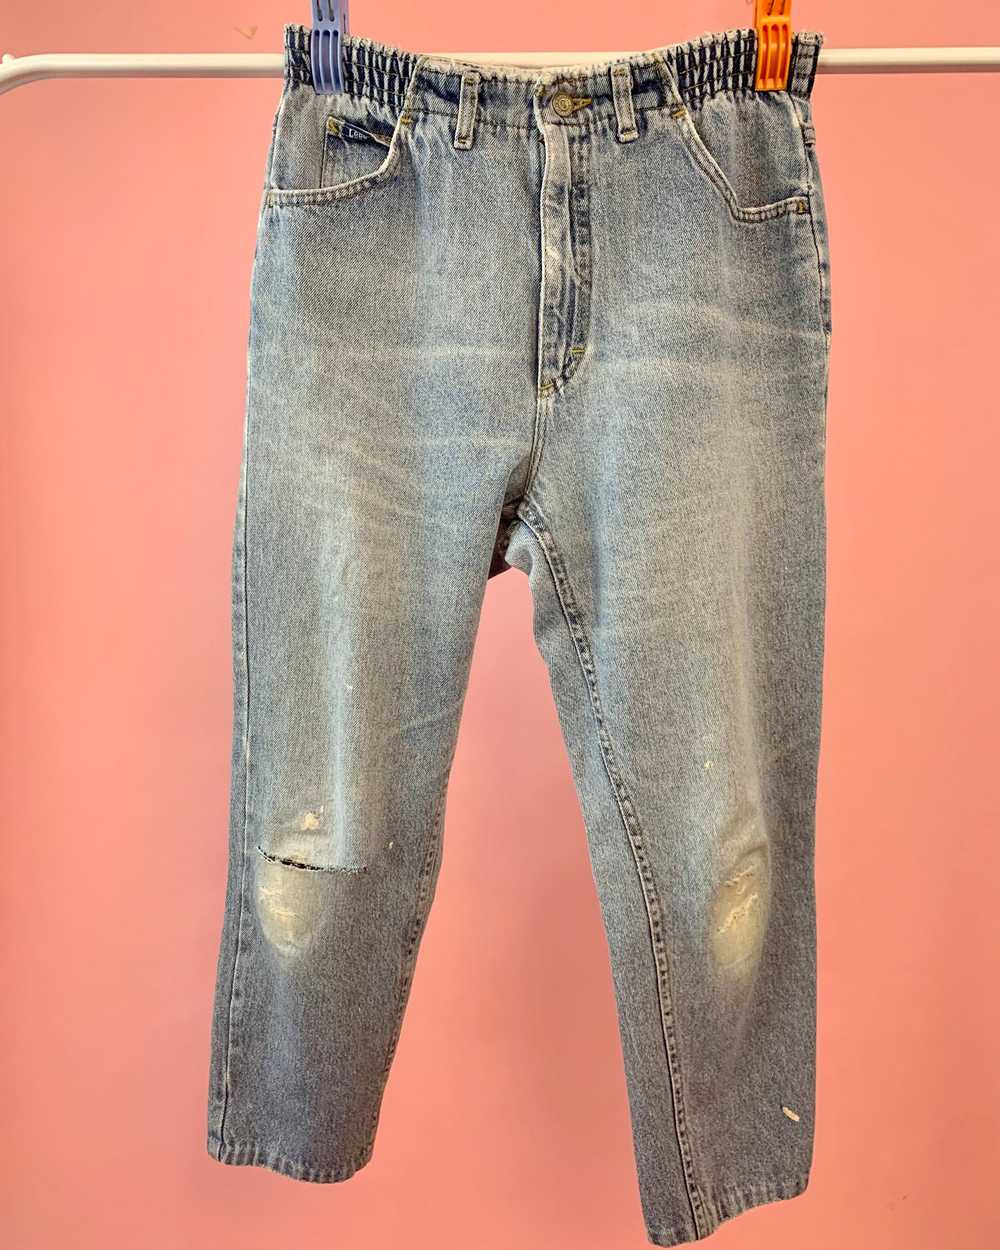 90’s extreme high waisted jeans - image 6